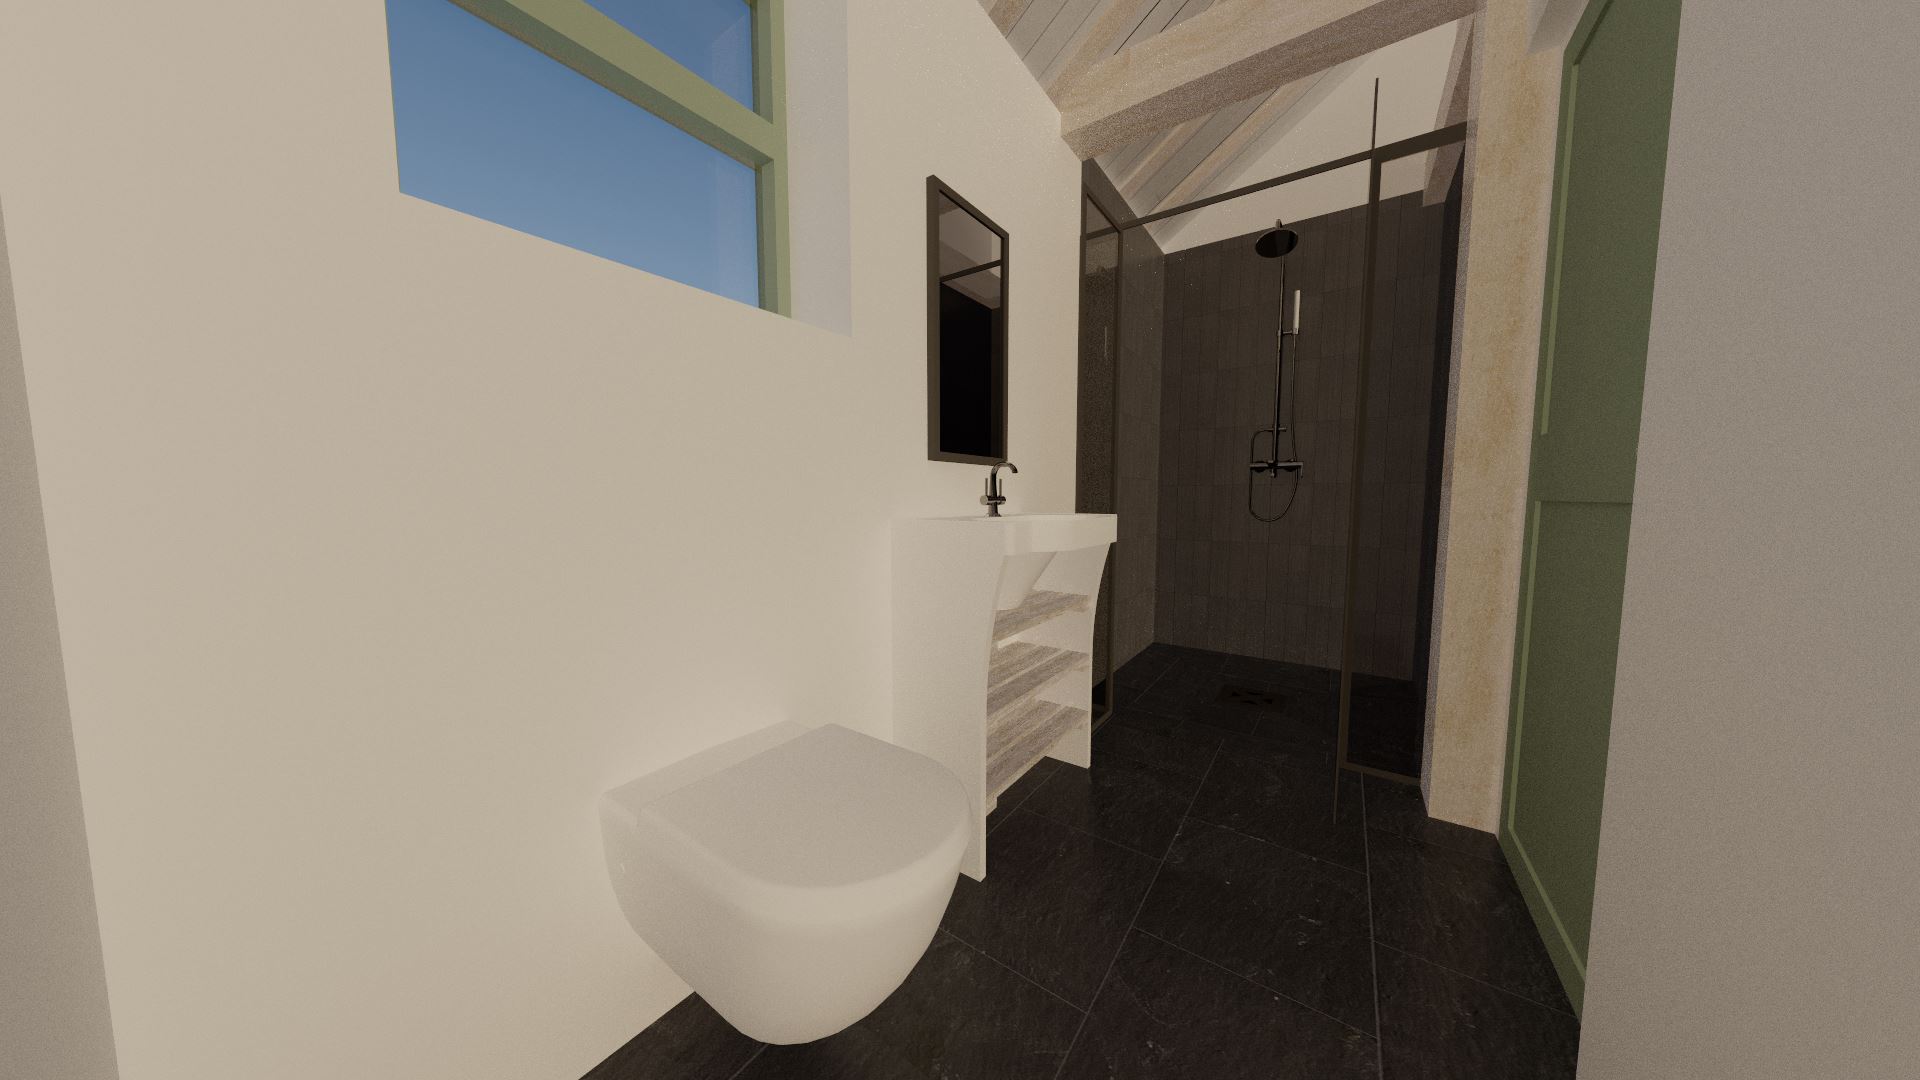 A close up of the floor and toilet in the wetroom. Very sleek!